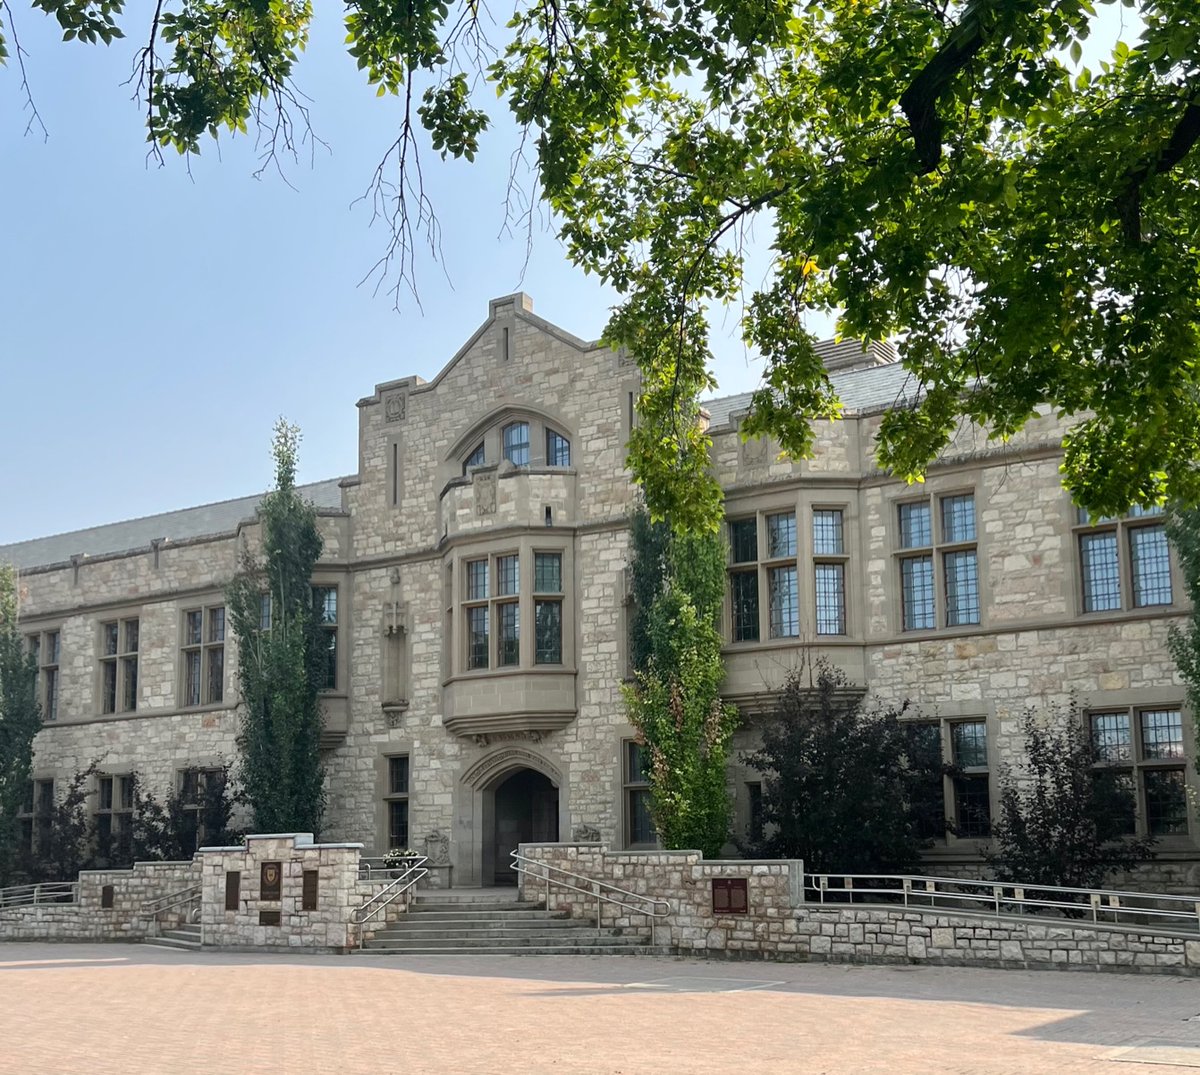 The calm before the Fall Term officially begins for most #USask students: A reminder that many services on campus will be closed for the long weekend on Sept. 4. Don’t forget to check next week’s welcome activities here: students.usask.ca/new-students.p…